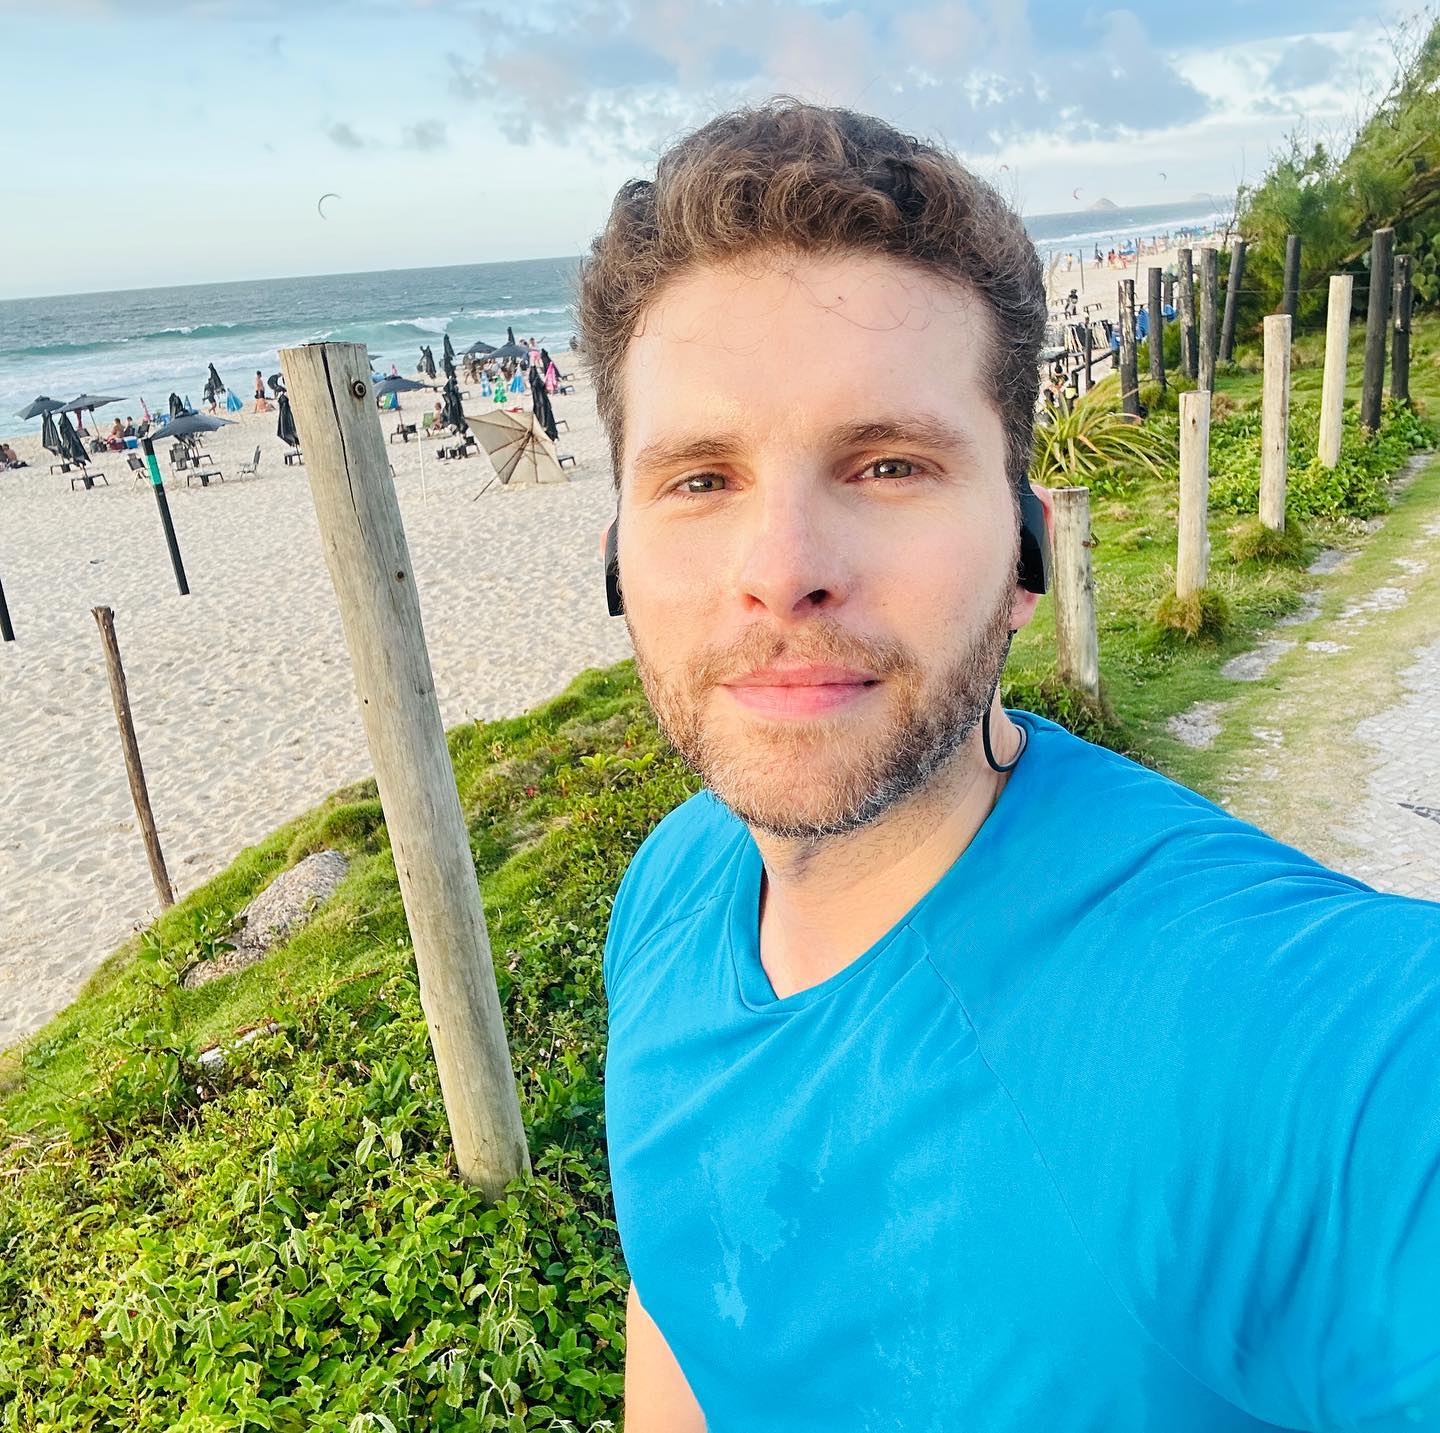 https://e.radikal.host/2023/04/20/Photo-by-Thiago-Fragoso-on-January-27-2023.-May-be-a-selfie-of-one-or-more-people-beard-beach-and-ocean.-2.jpg